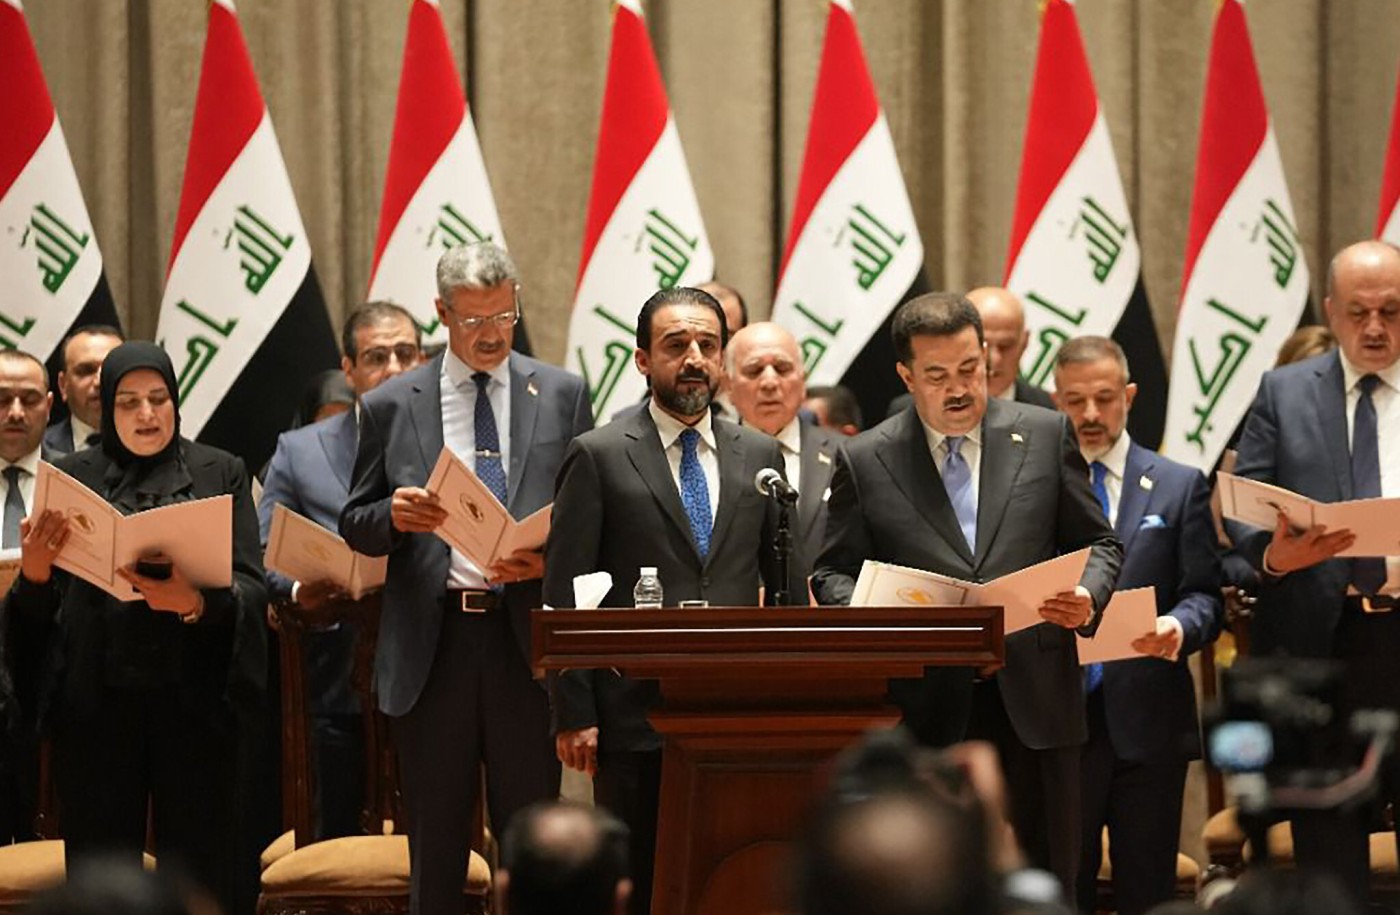 Iraqi Parliament's performance declines; Fifth round deemed 'weakest' Image